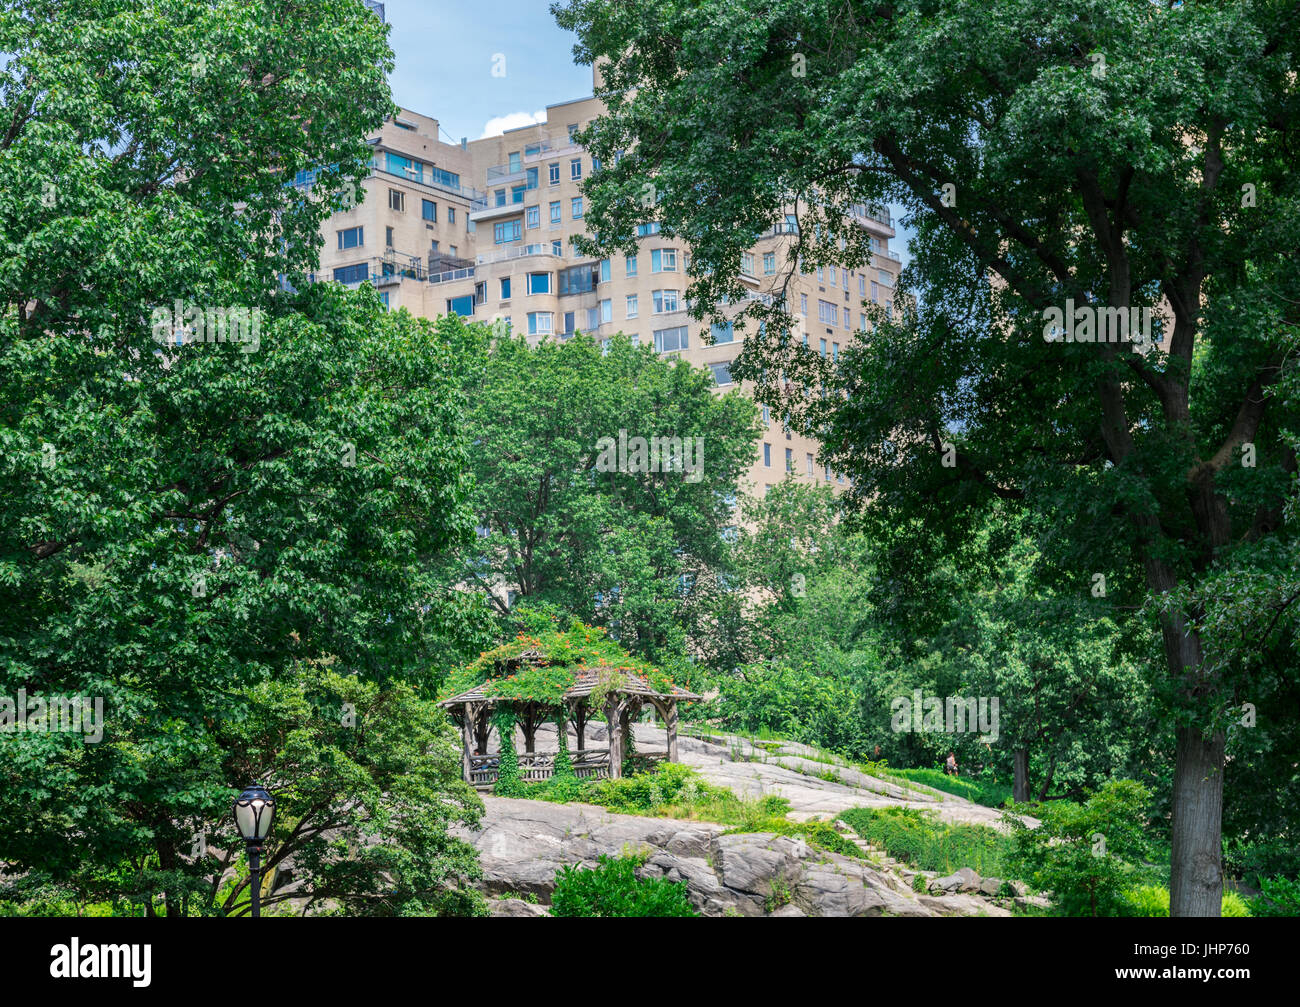 small crude structure in central park with high rise buidings in the distance in NYC. Stock Photo